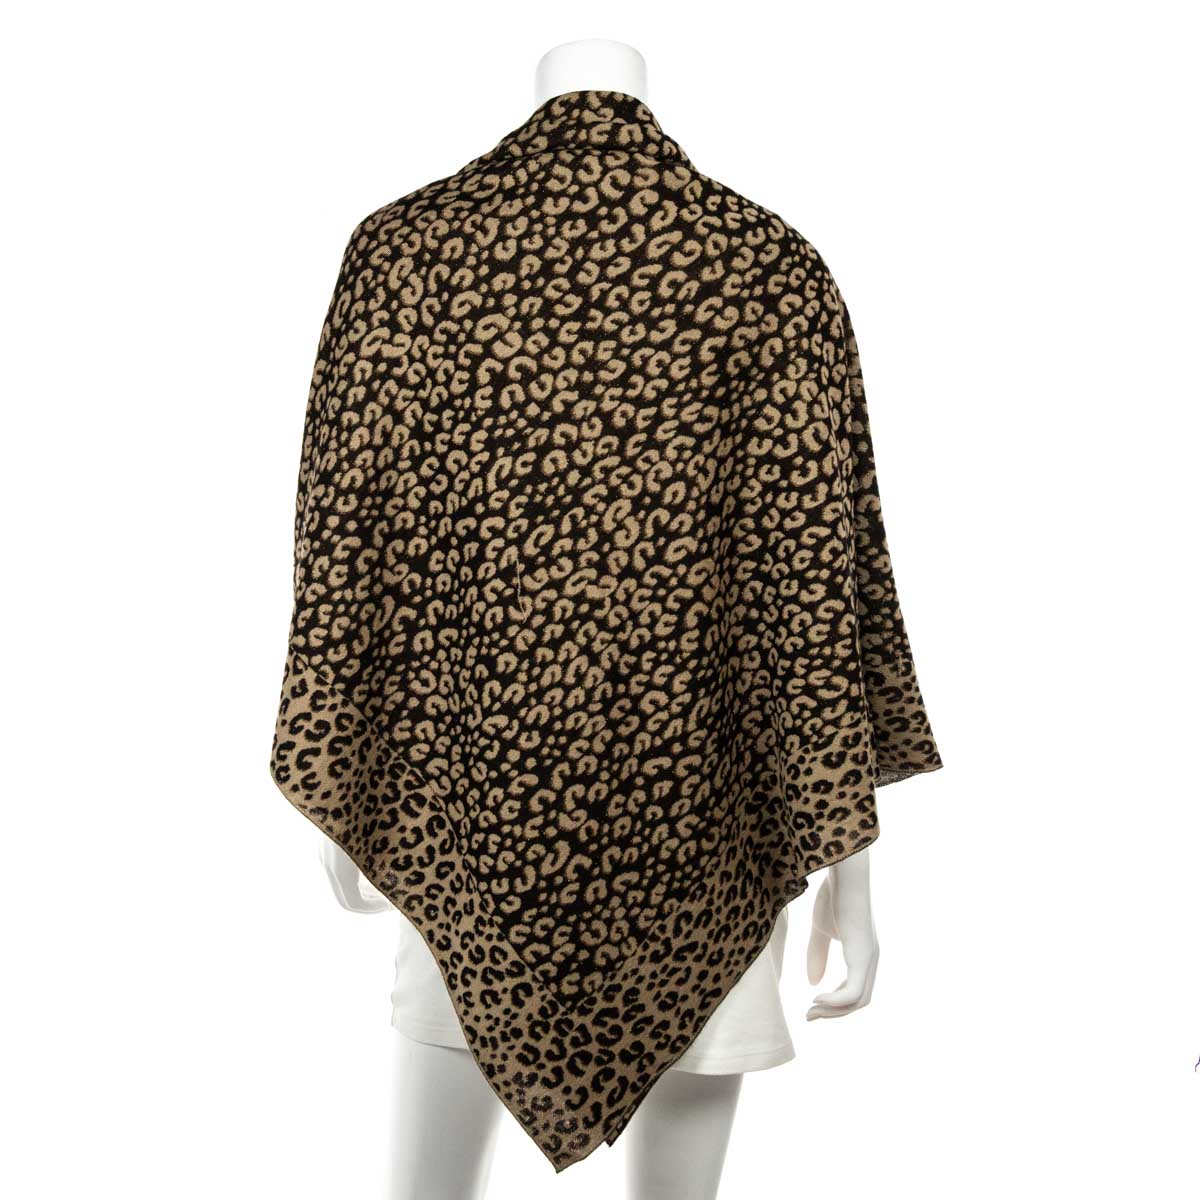 YEEES,IT´S KATE LOUIS VUITTON LEOPARD STEPHEN SPROUSE CASHMERE SILK SHAWL  SCARF